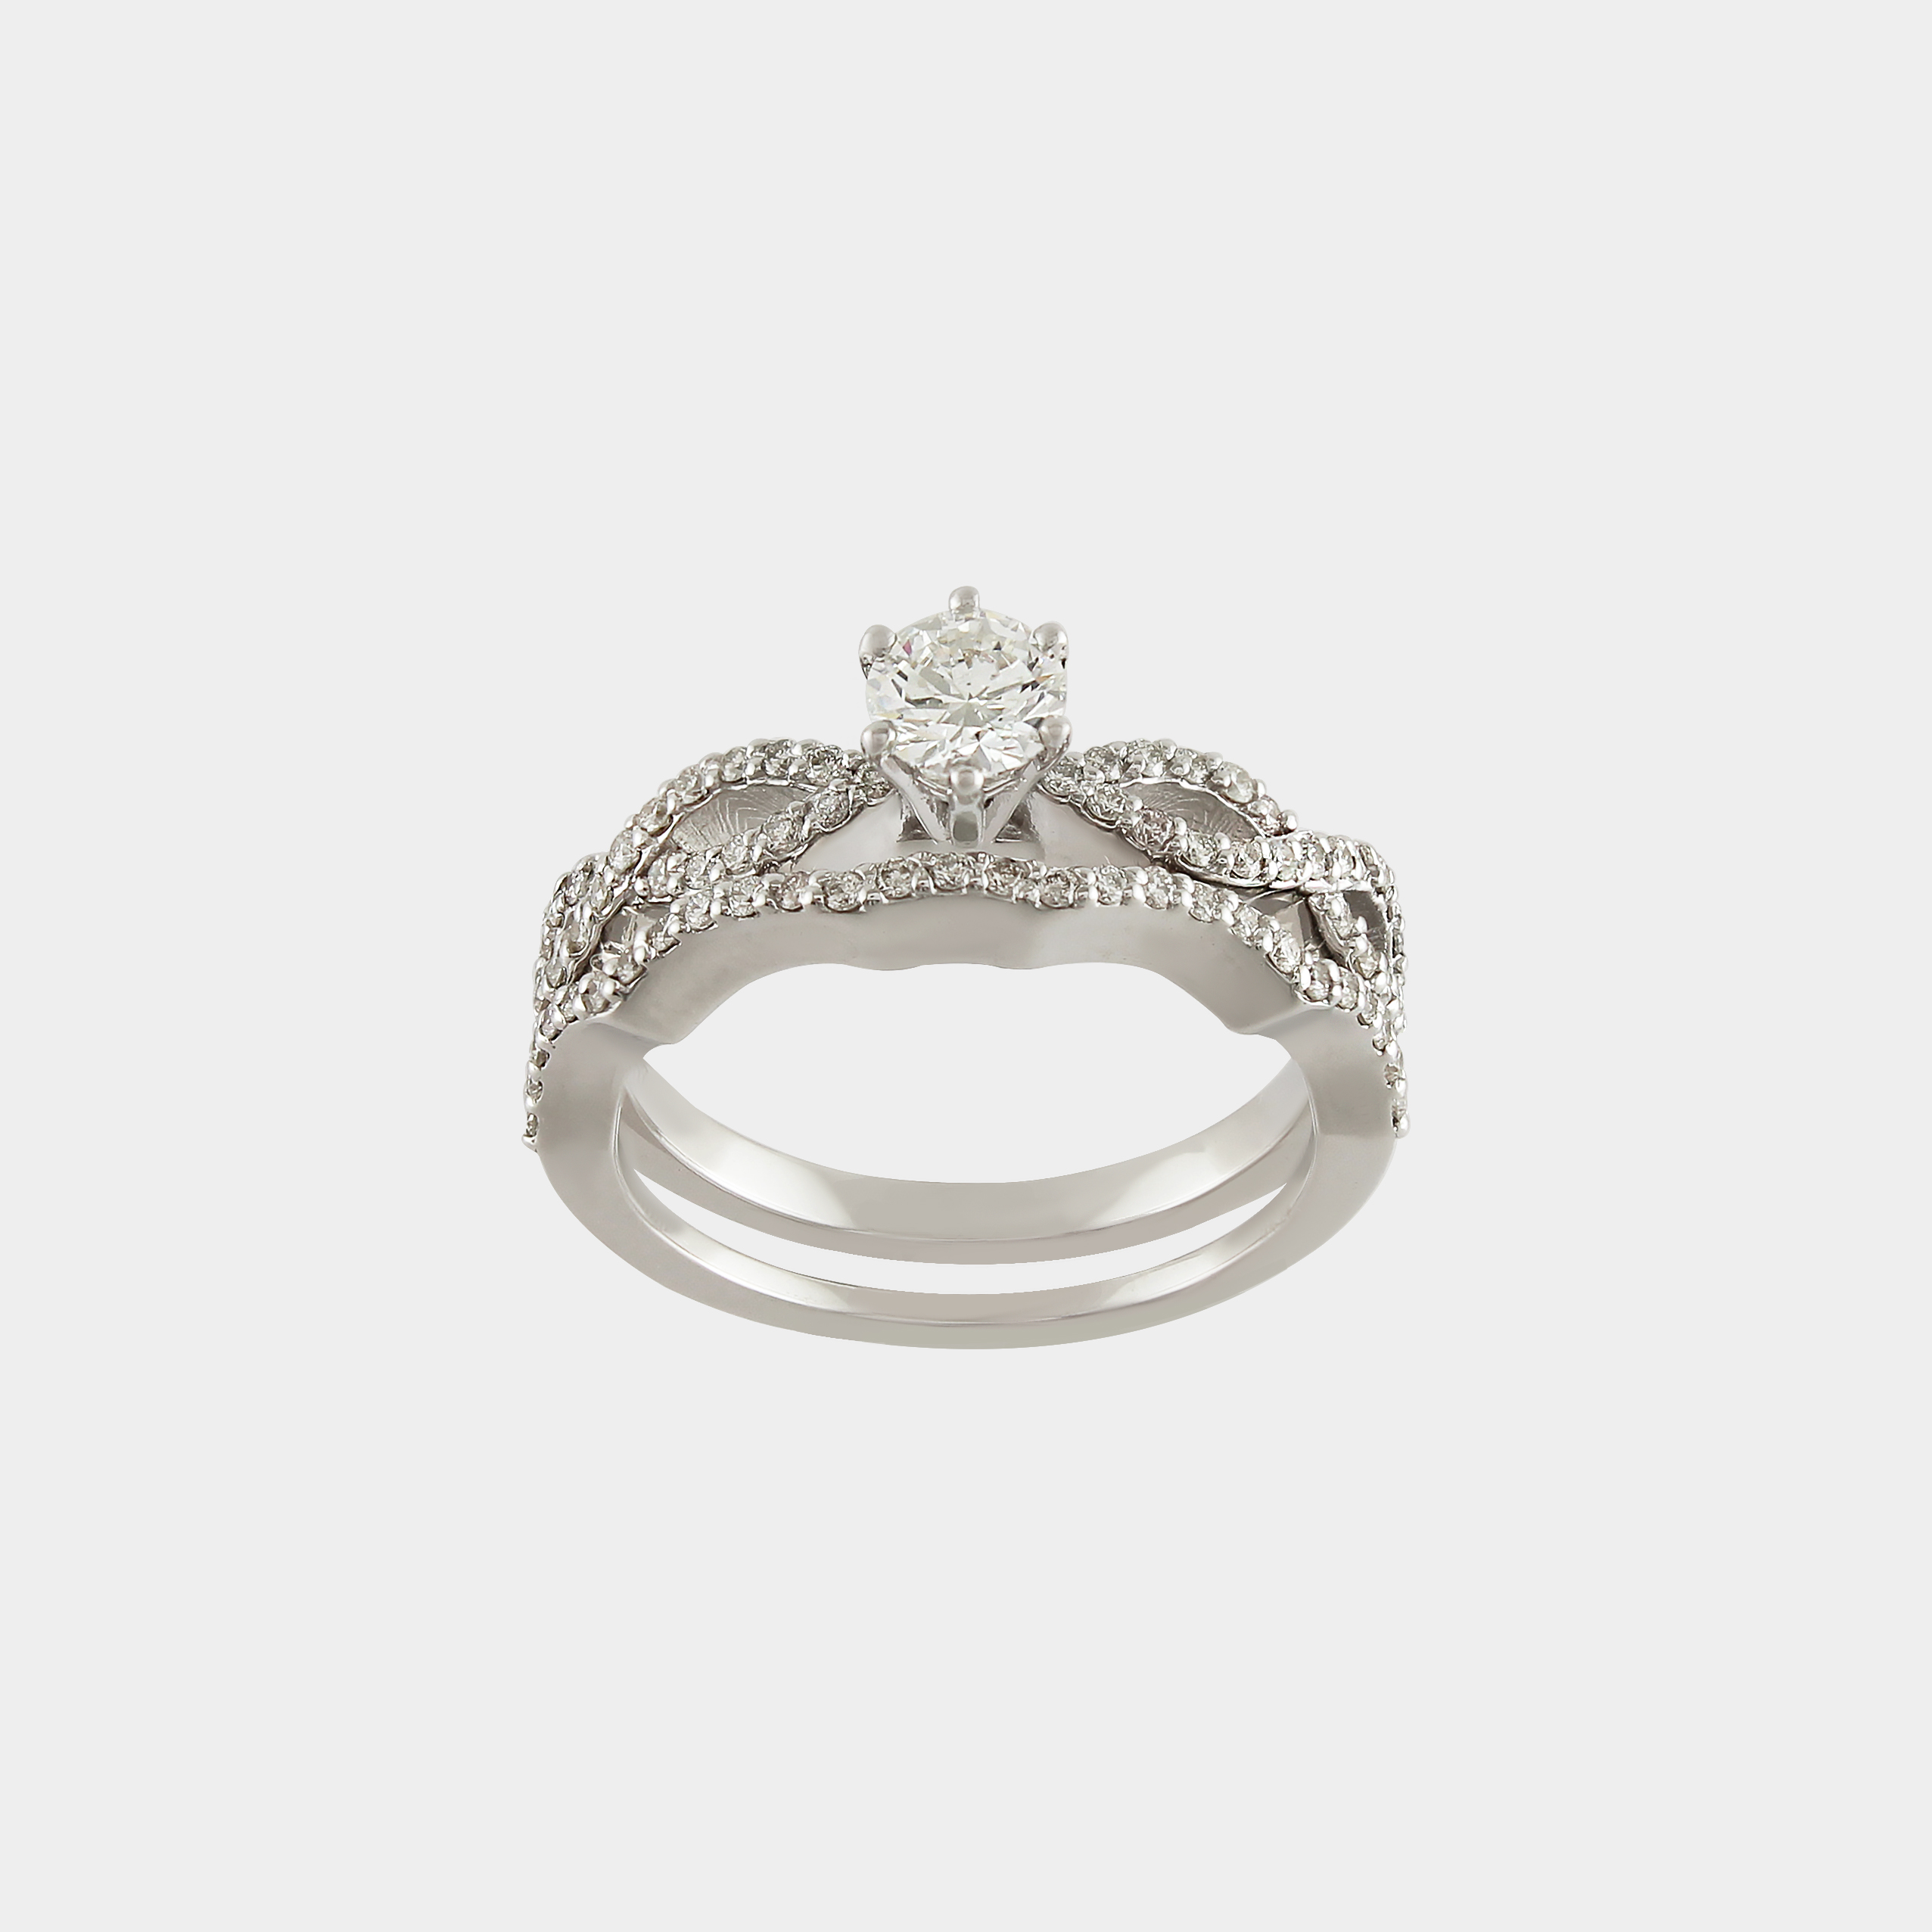 DIAMOND TWIN SOLITAIRE 18KT GOLD